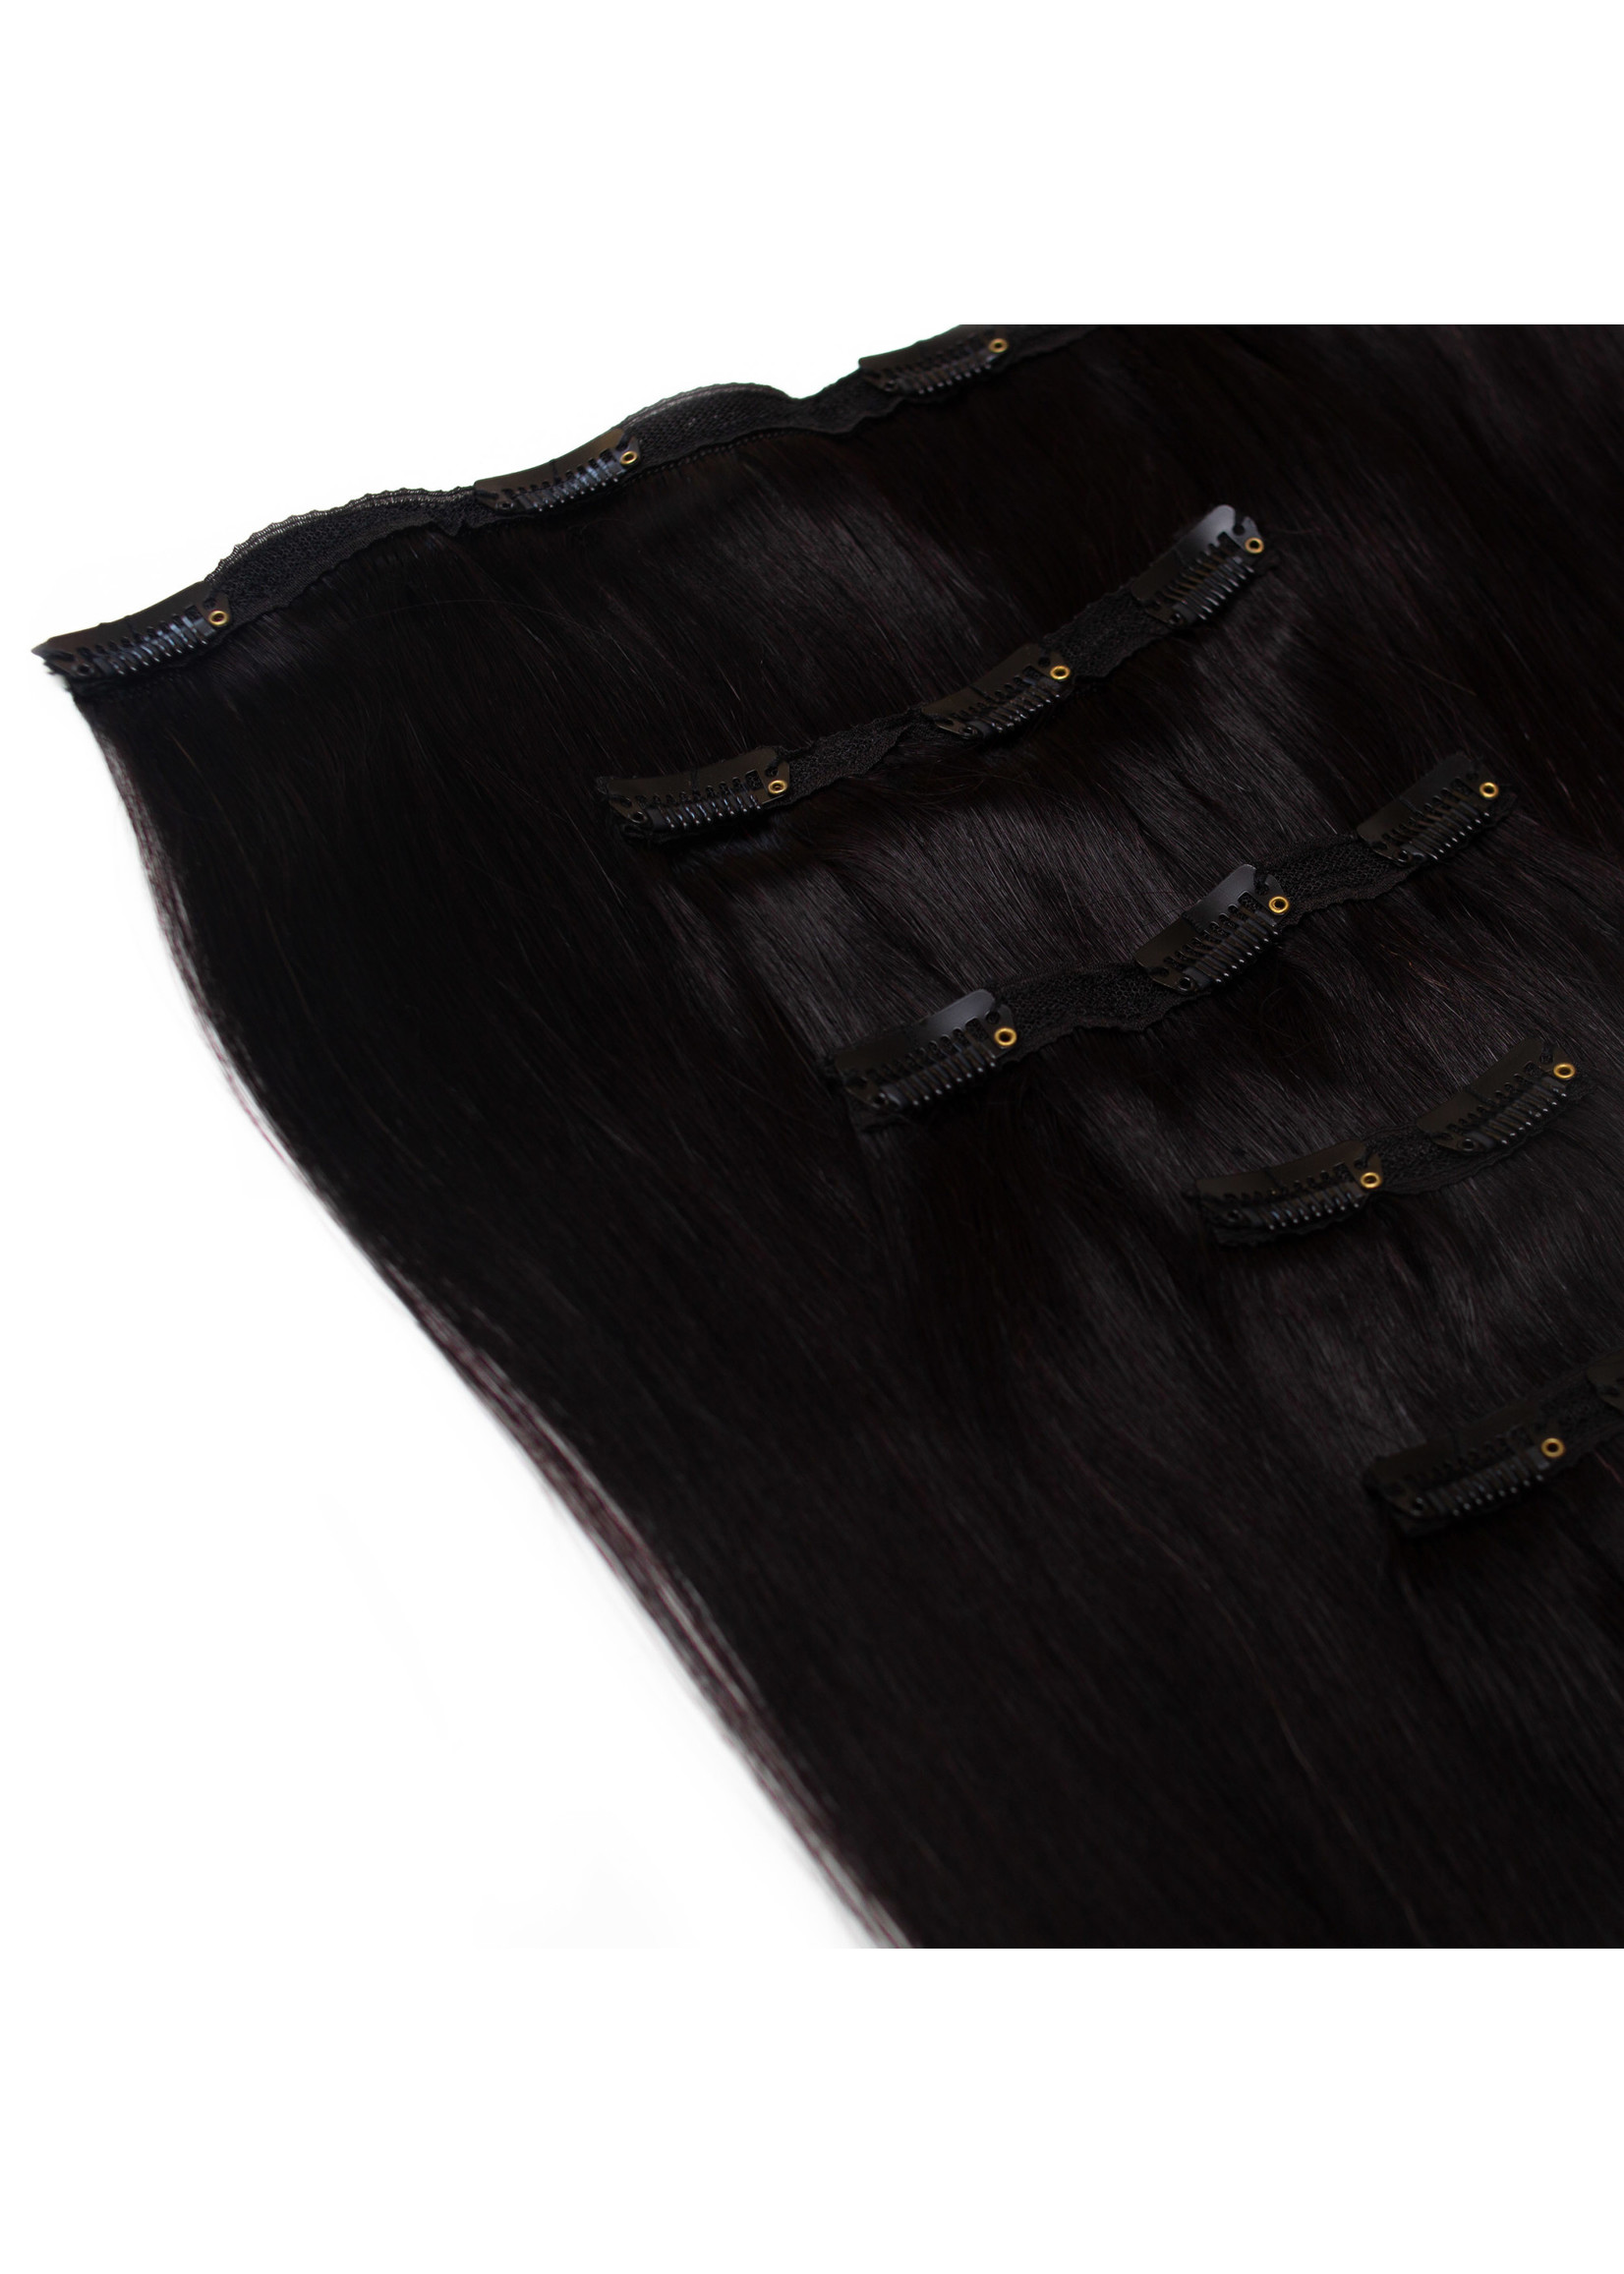 Seamless1 Seamless1 Human Hair Clip-in 5pc Hair Extensions 21.5 Inches - Ritzy